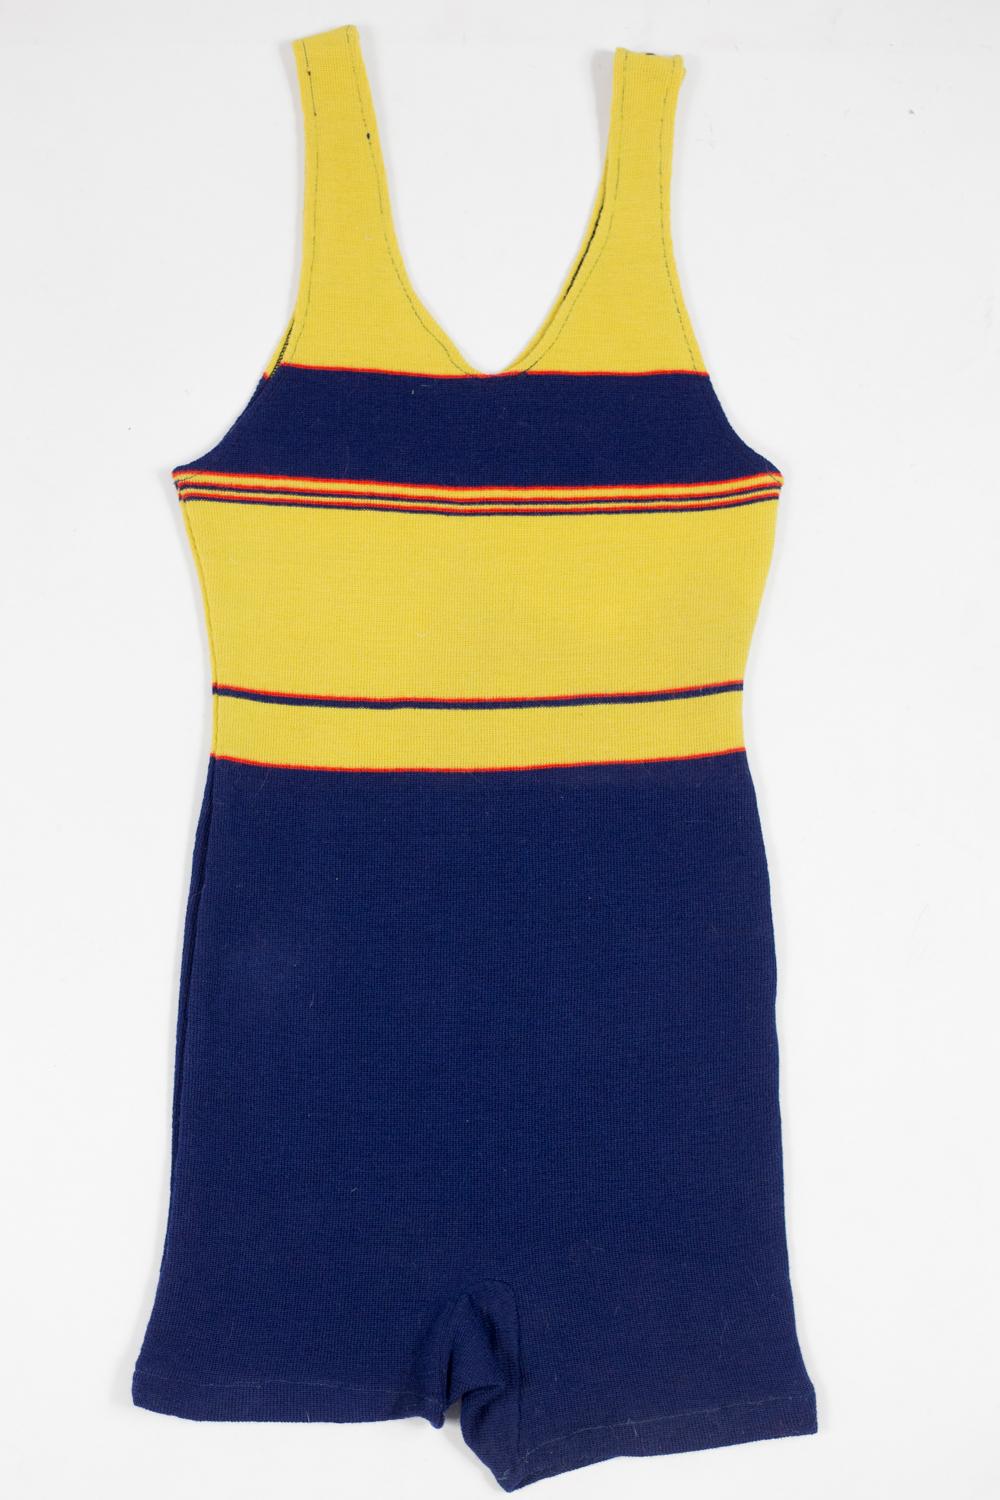 Circa 1925/1930
France
 
Beautiful feminine swimsuit or Art Deco swimsuit in striped wool knit dating from the years 1925/1930. In line with the avant-garde of the Ballets Russes by Serge De Diaghilev with in particular the costumes of the Train